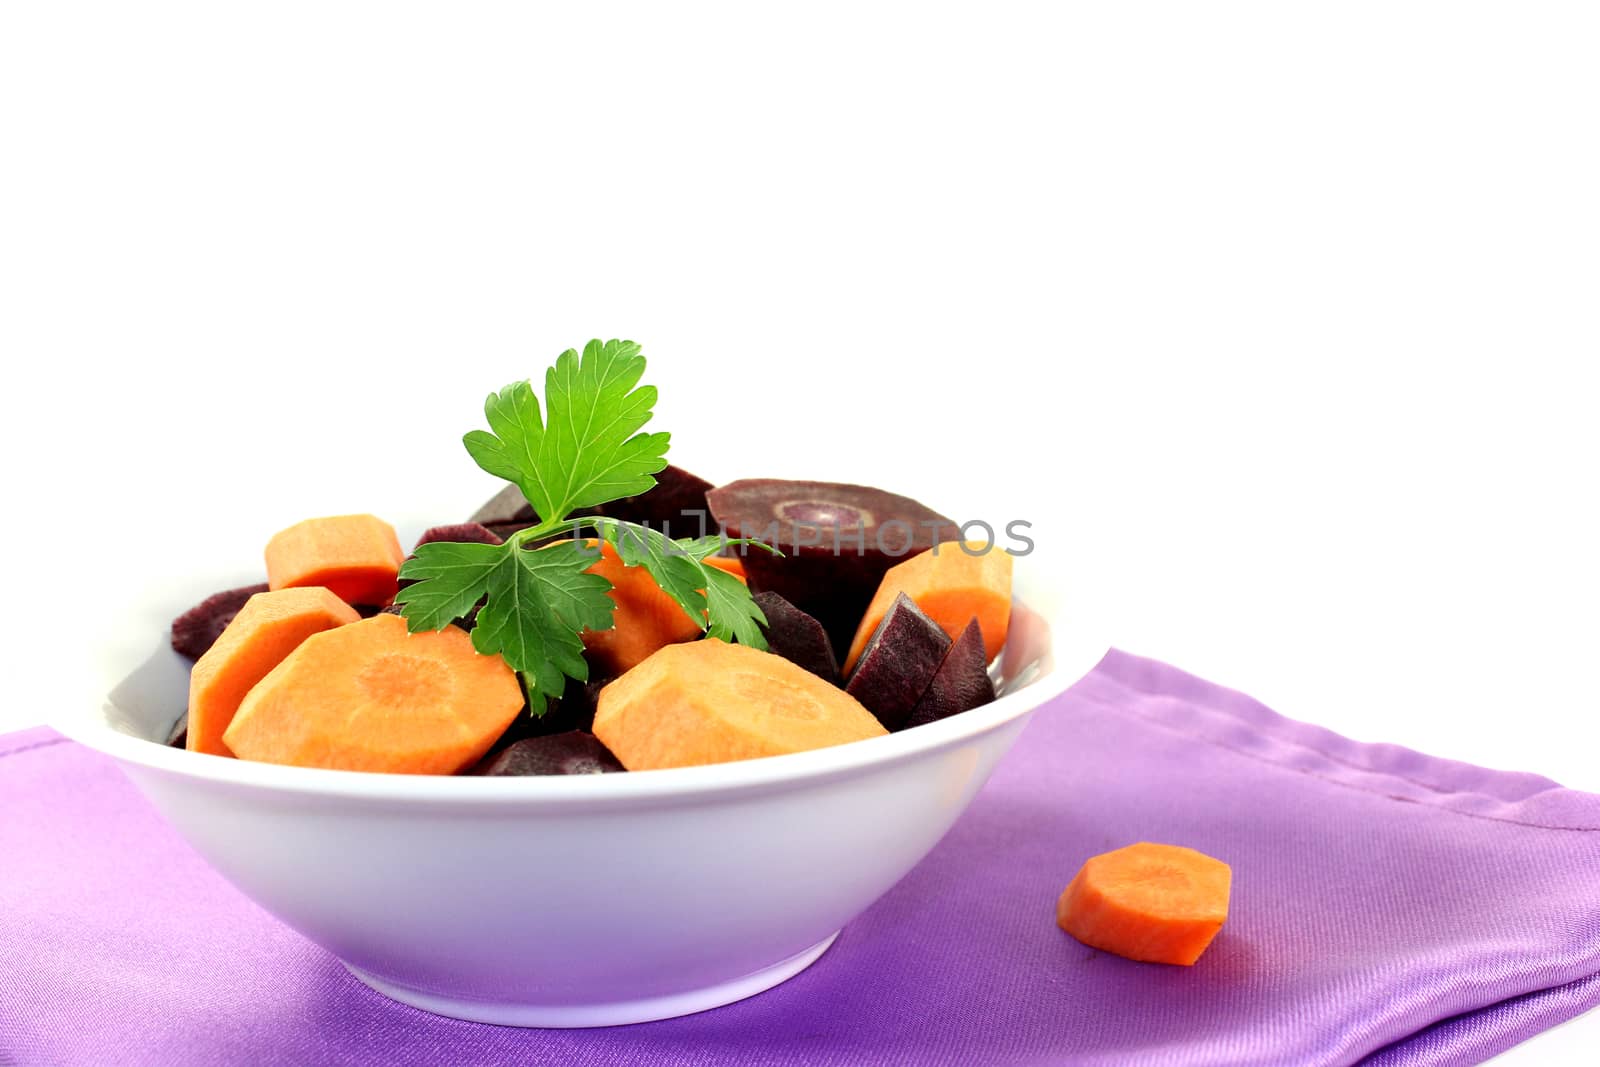 sliced orange and purple carrots on a light background